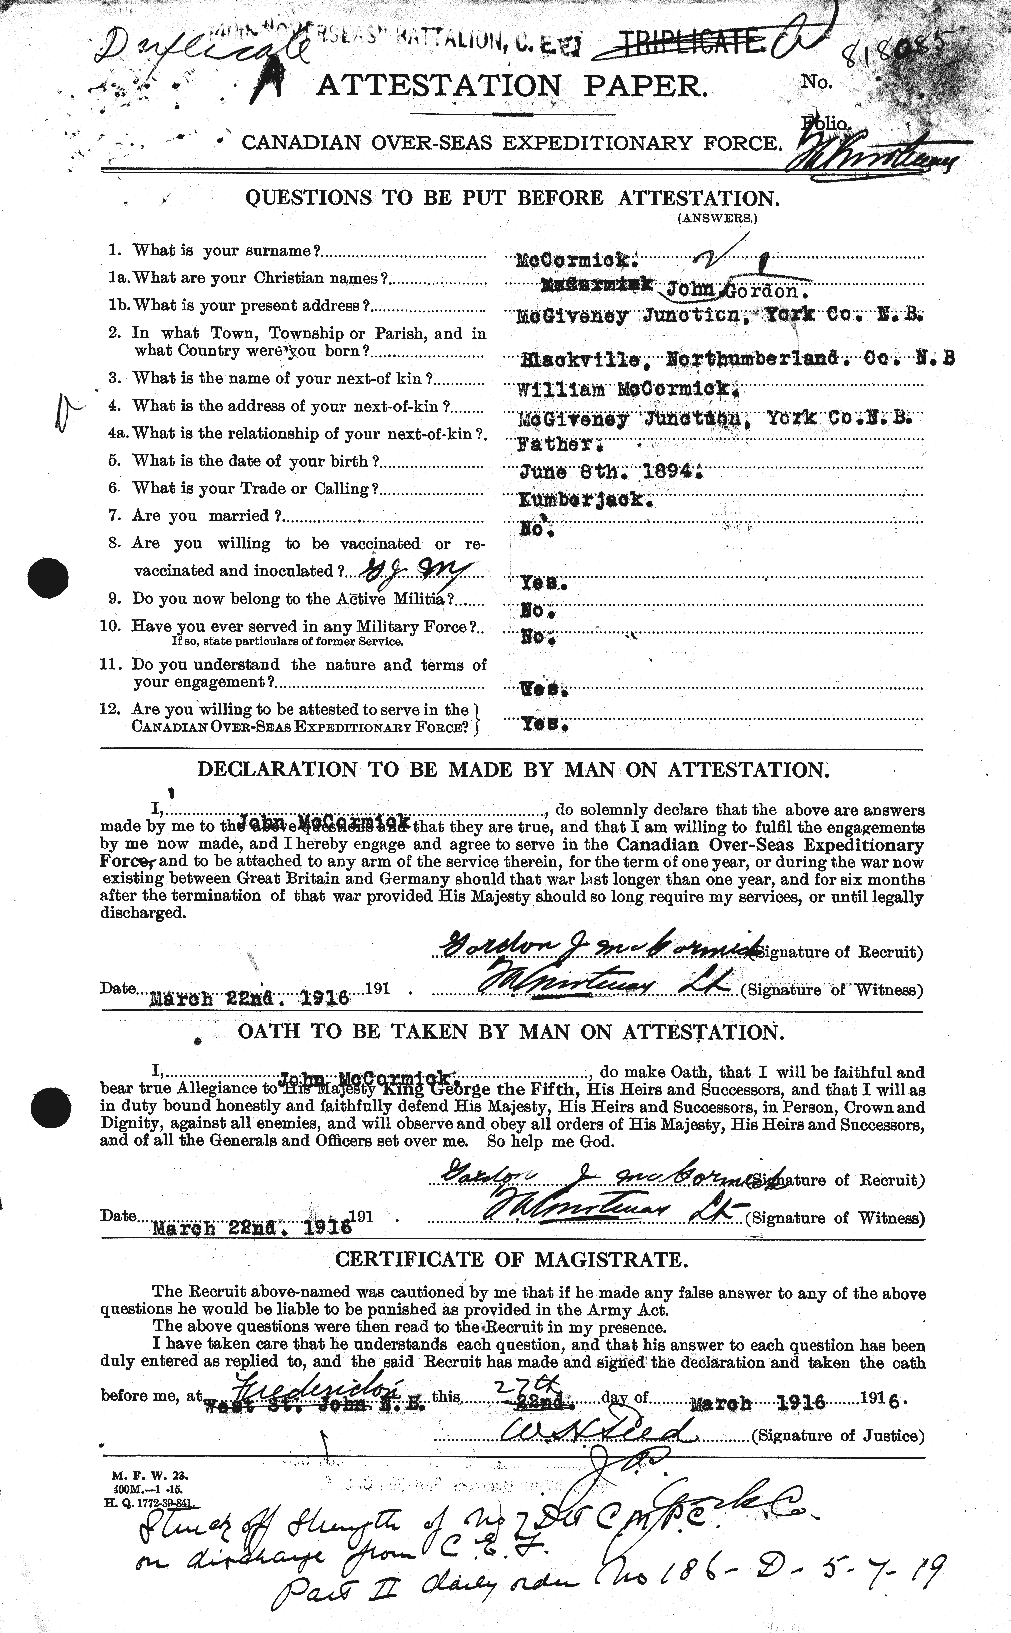 Personnel Records of the First World War - CEF 133746a